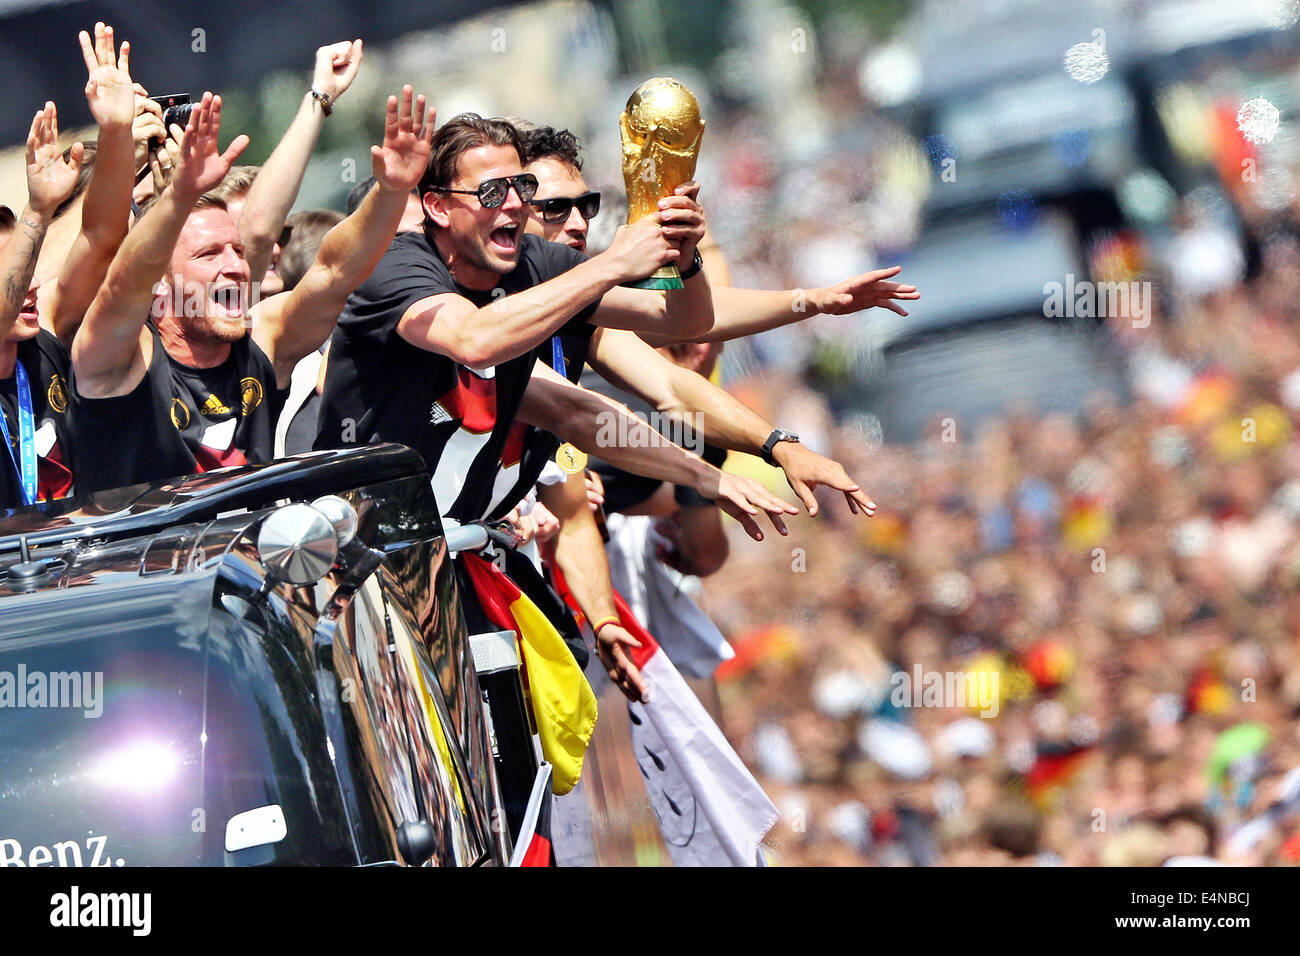 Berlin, Germany. 15th July, 2014. The players of the German national soccer team celebrate on a truck during their return to Berlin, Germany, 15 July 2014. The German team on 13 July 2014 had won the Brazil 2014 FIFA Soccer World Cup final against Argentina by 1-0 to win the title for the fourth time after 1954, 1974 and 1990. Photo: JAN WOITAS/DPA/Alamy Live News Stock Photo